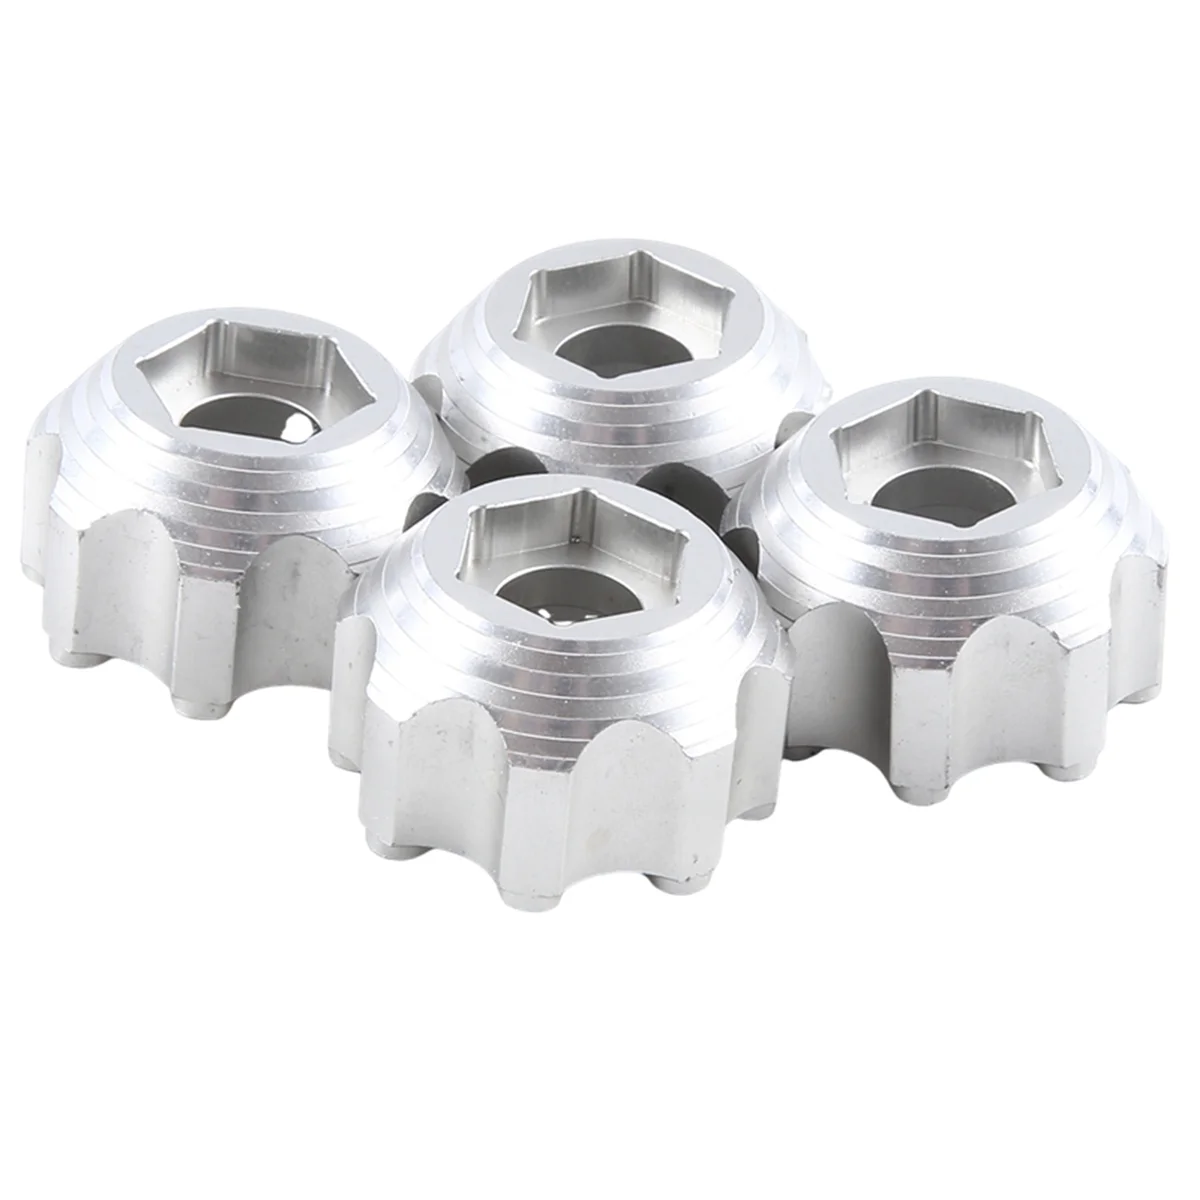 

4Pcs Alloy Wheel Adapter 3.8 Inch Wheel Adapter for PL ProLine 3.8 Inch 8x32 to 17mm Wheel Silver